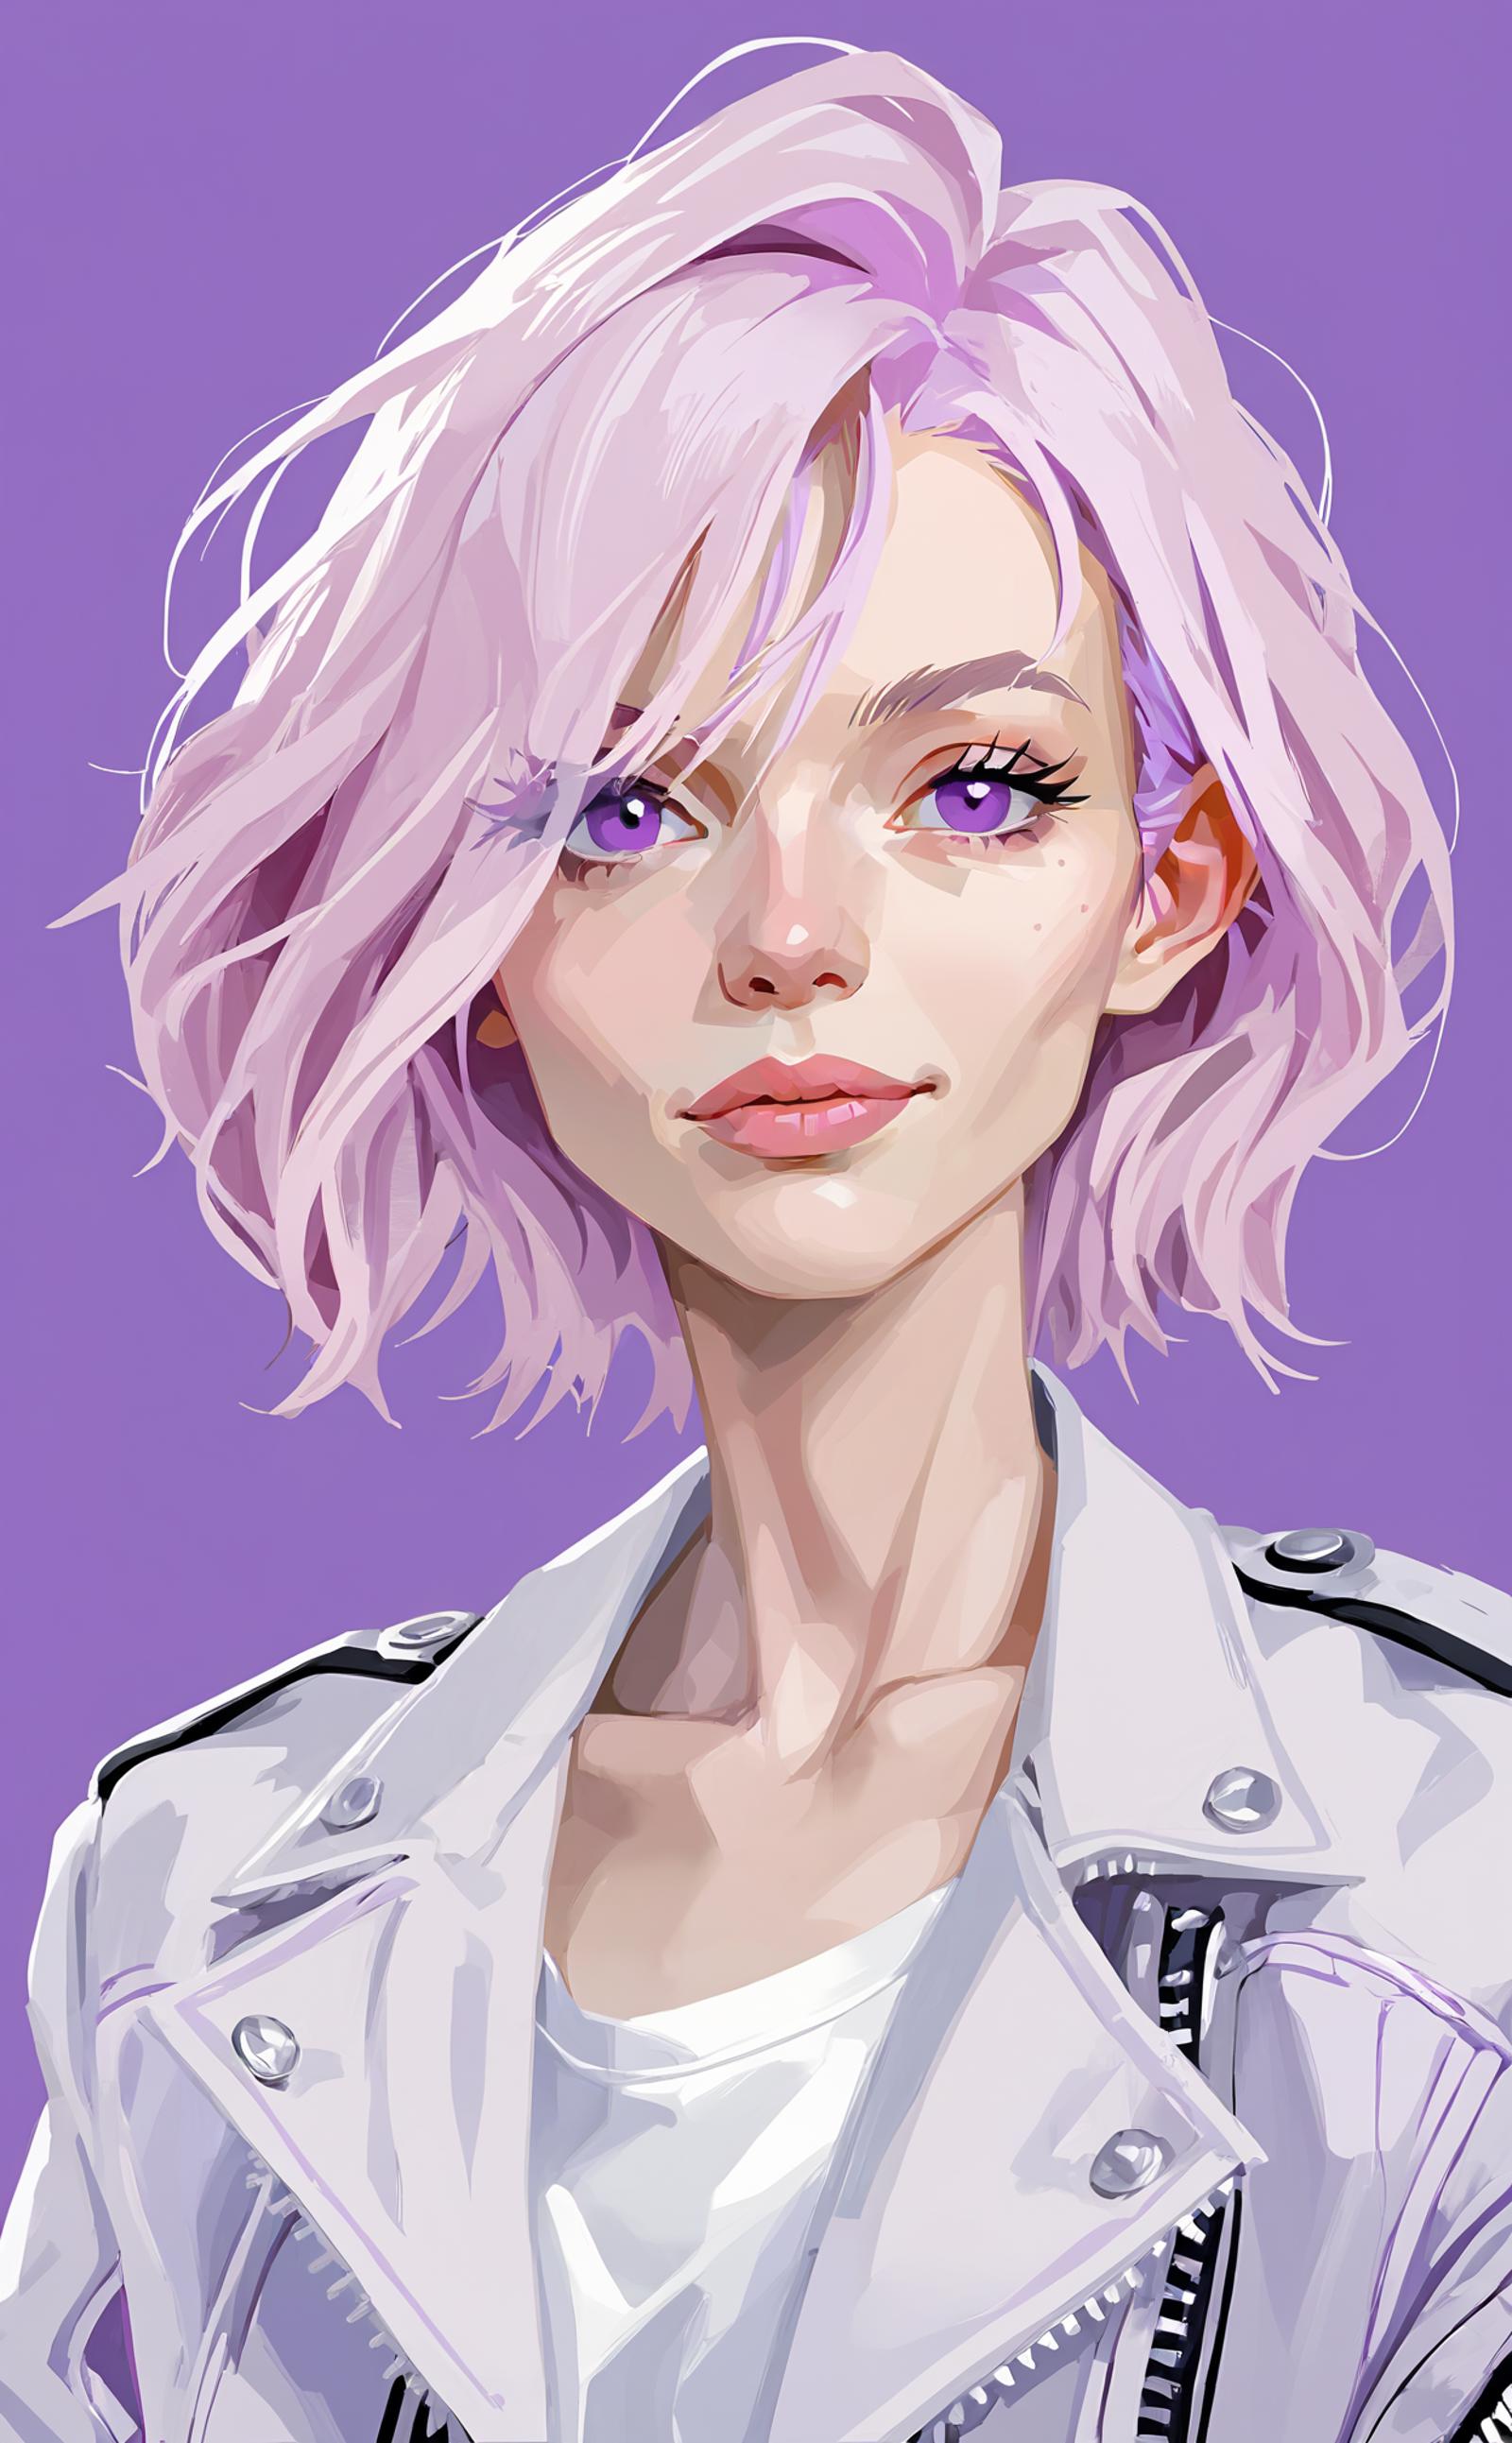 A girl with purple eyes and a white jacket.